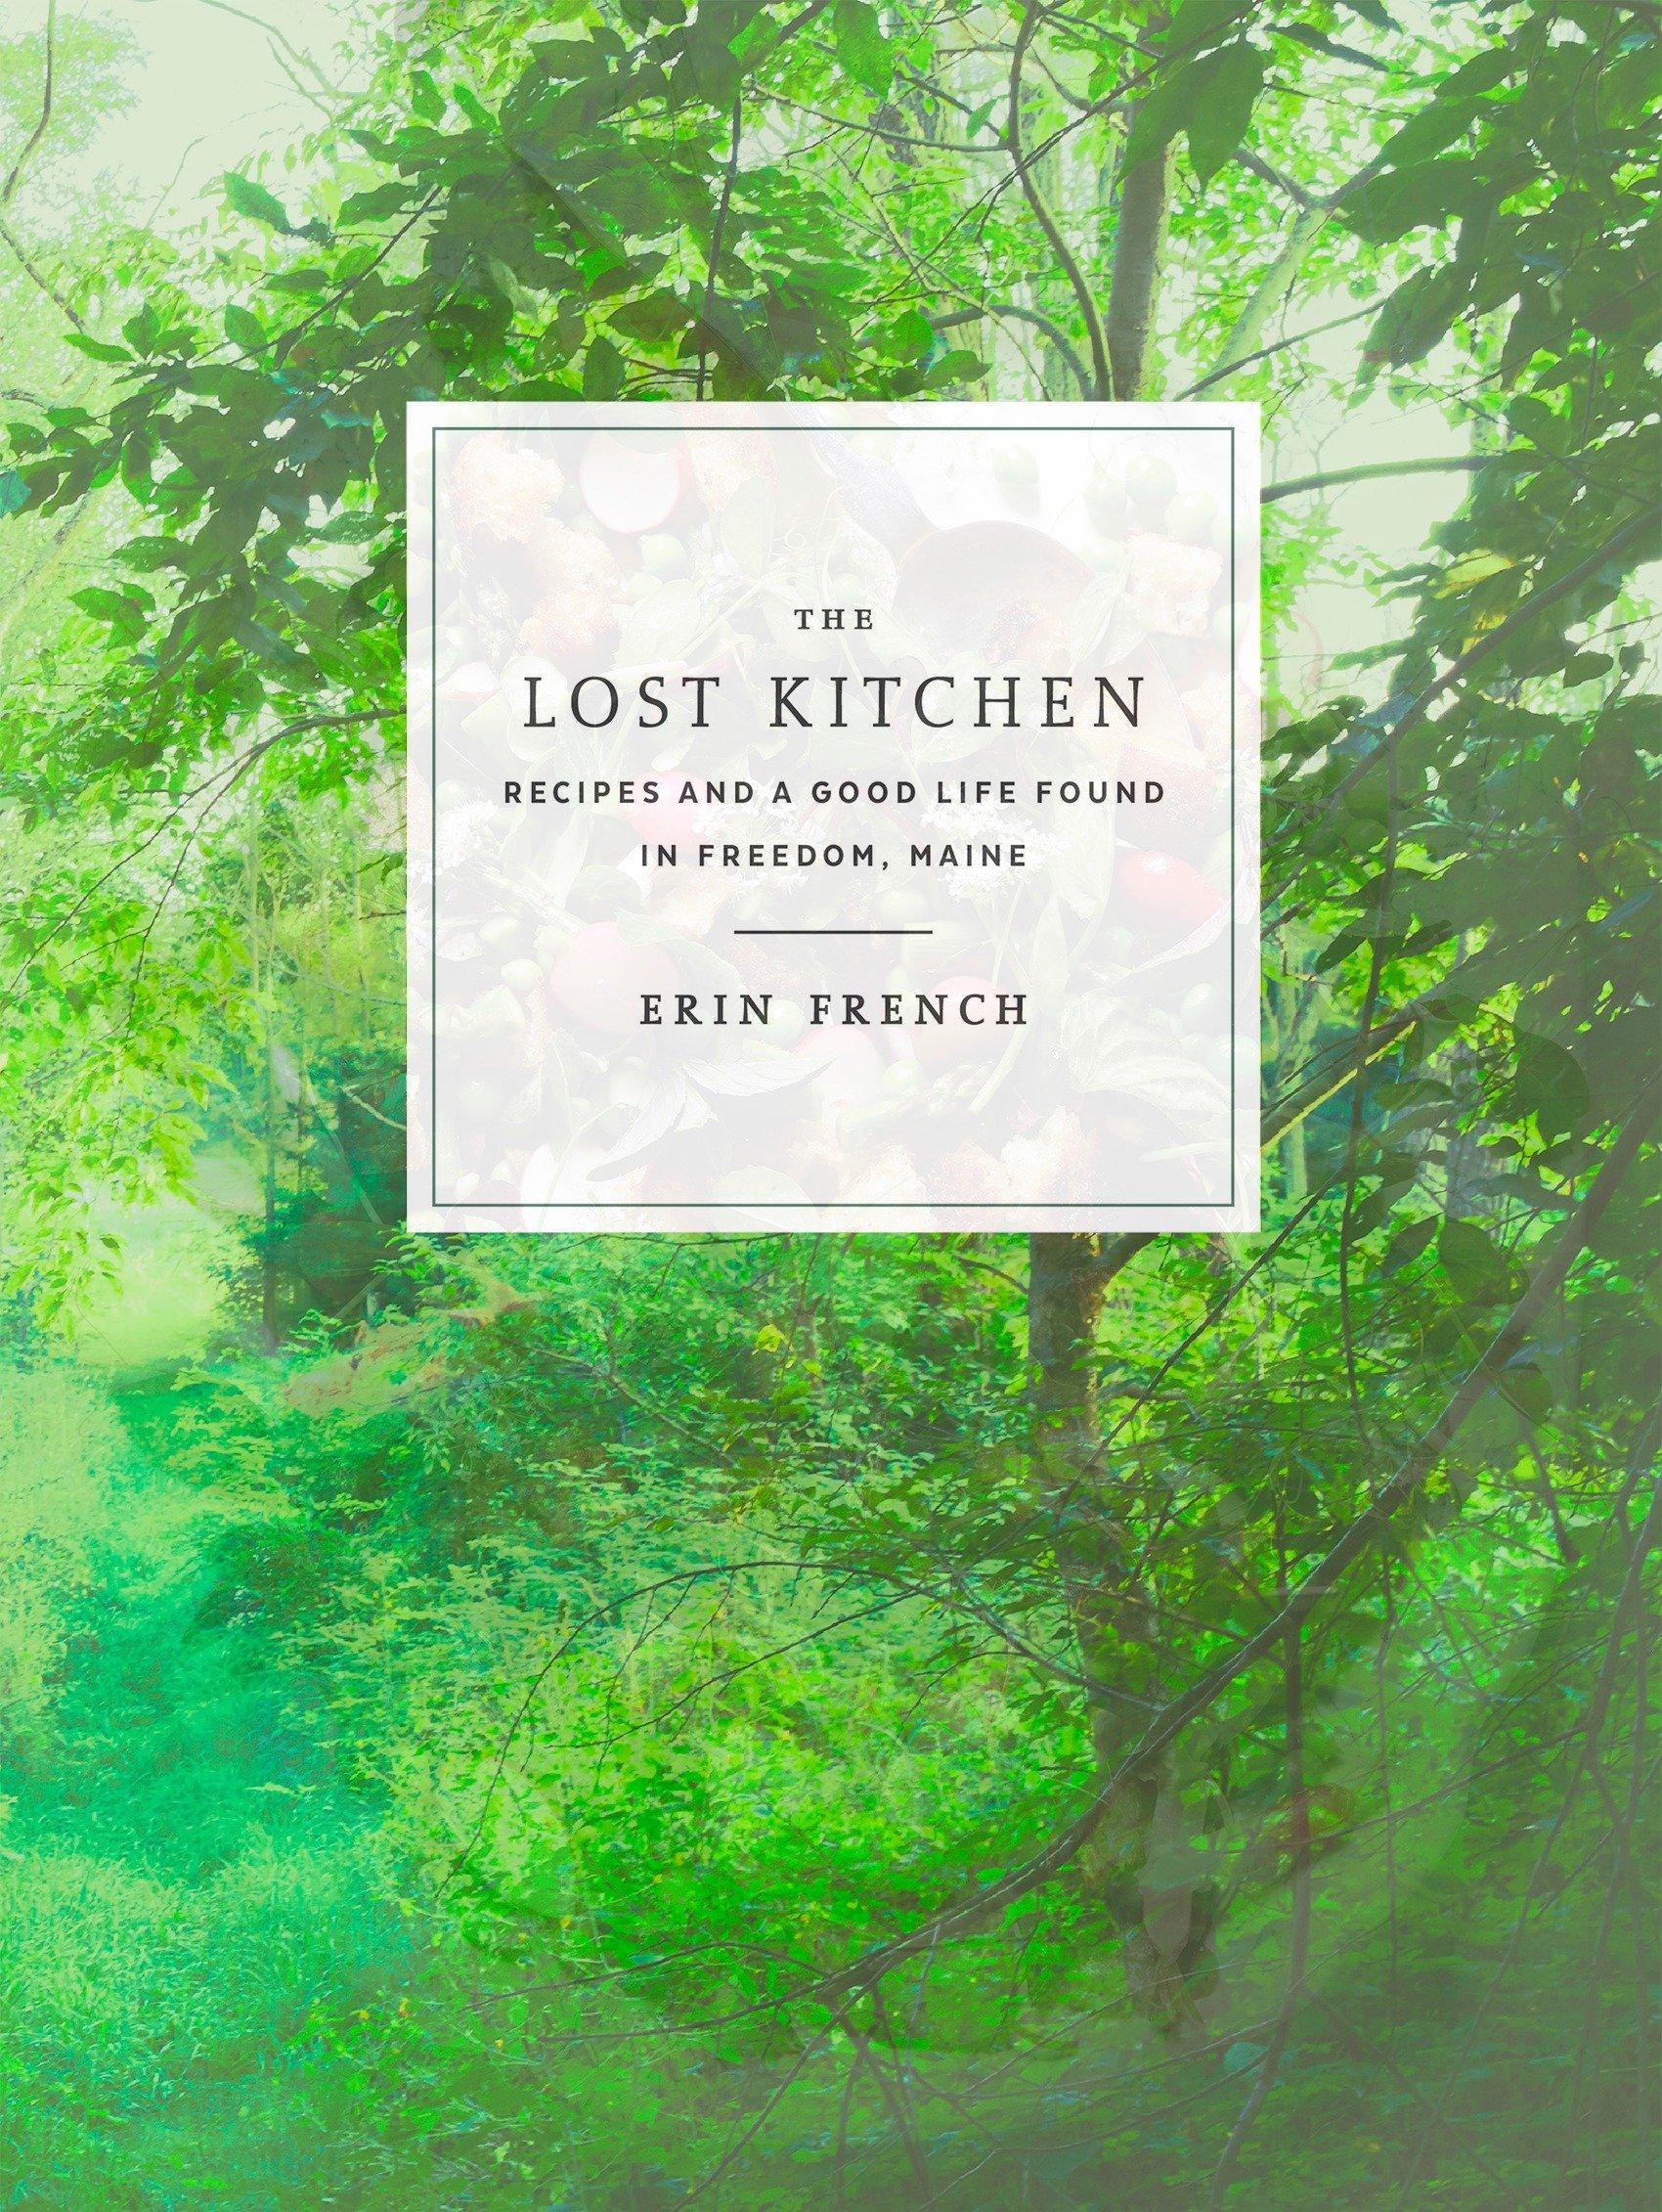 Lost Kitchen: Recipes and Good Life Found in Freedom, Maine